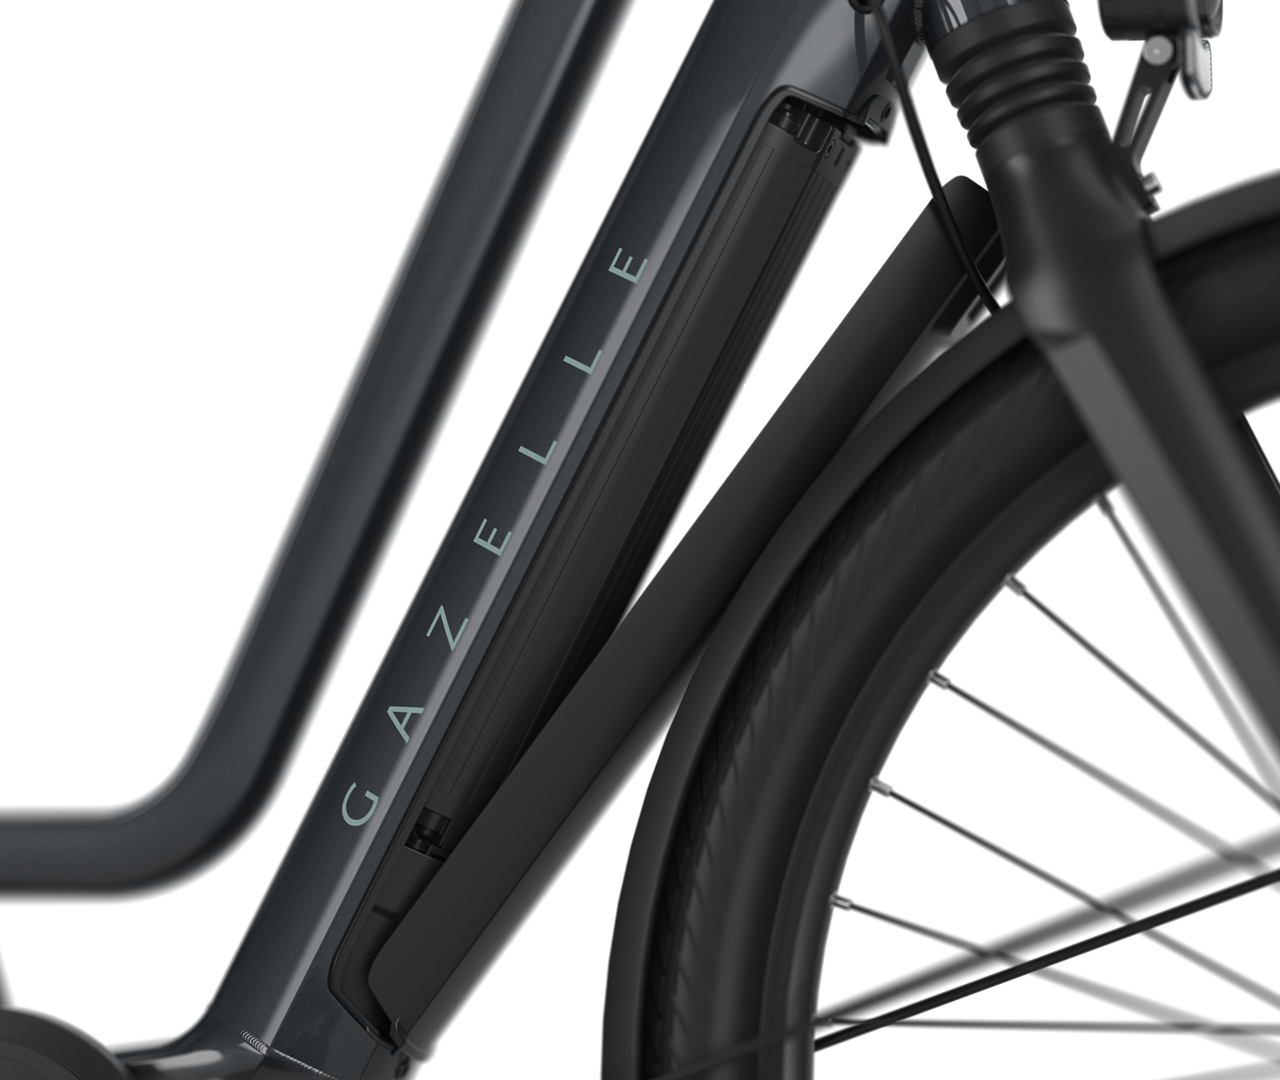 Intelligent battery integrated into the down tube Gazelle Chamonix T10 HMS E-bike low-step brewster grey